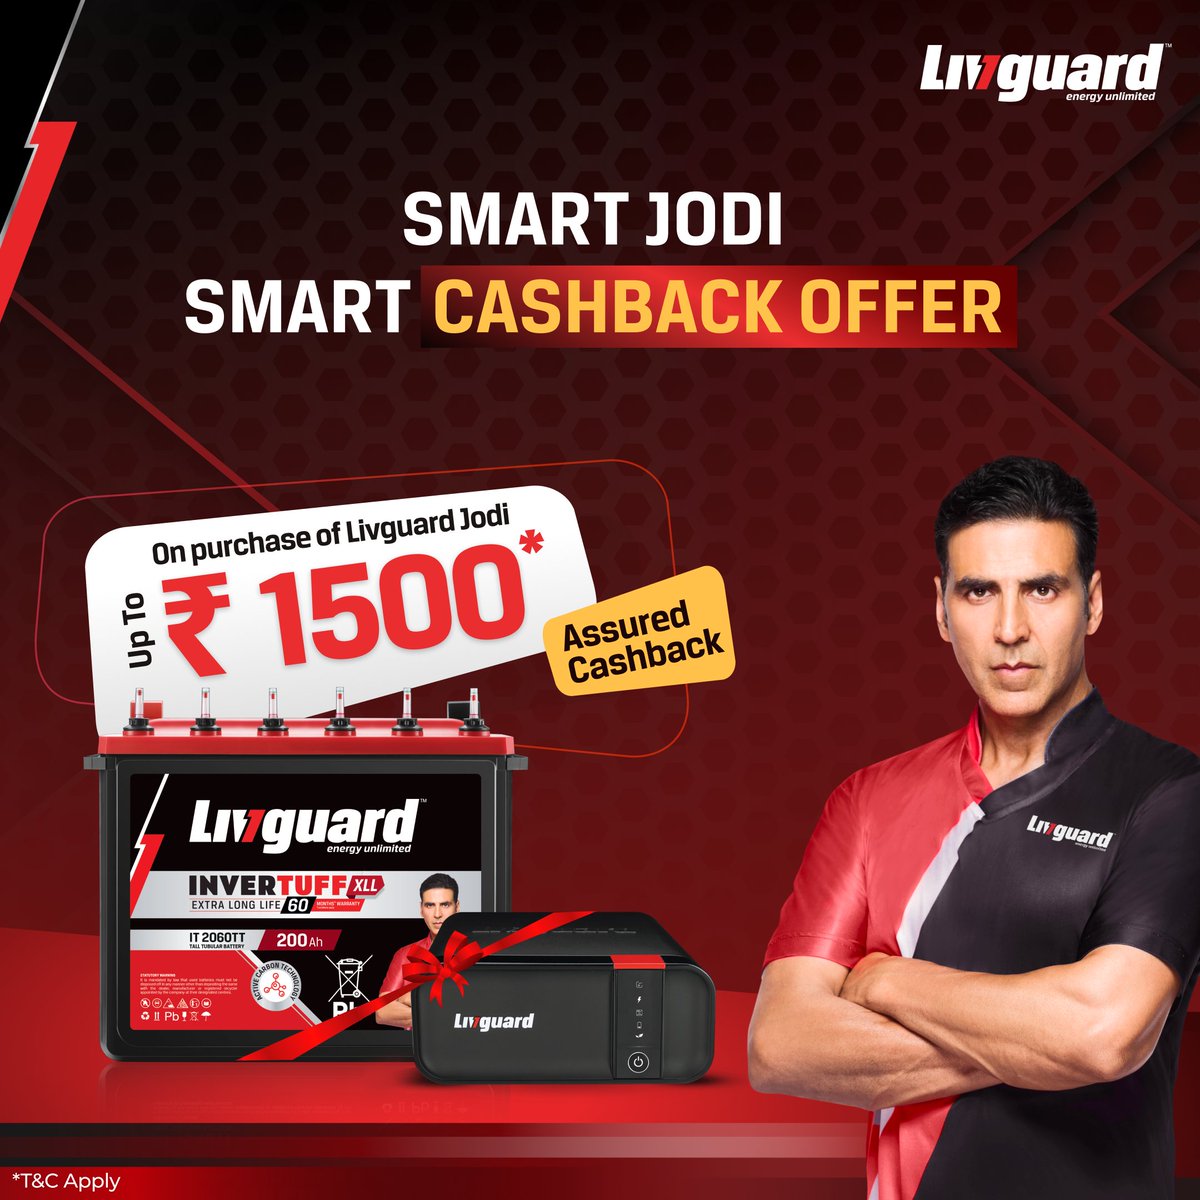 The power is in your hands with Livguard! 🔋💰 Buy any Livguard Inverter and selected Inverter Battery and get a cashback of up to Rs. 1500! Don't miss this electrifying offer! ⚡

#Livguard #PowerInYourHands #CashbackOffer